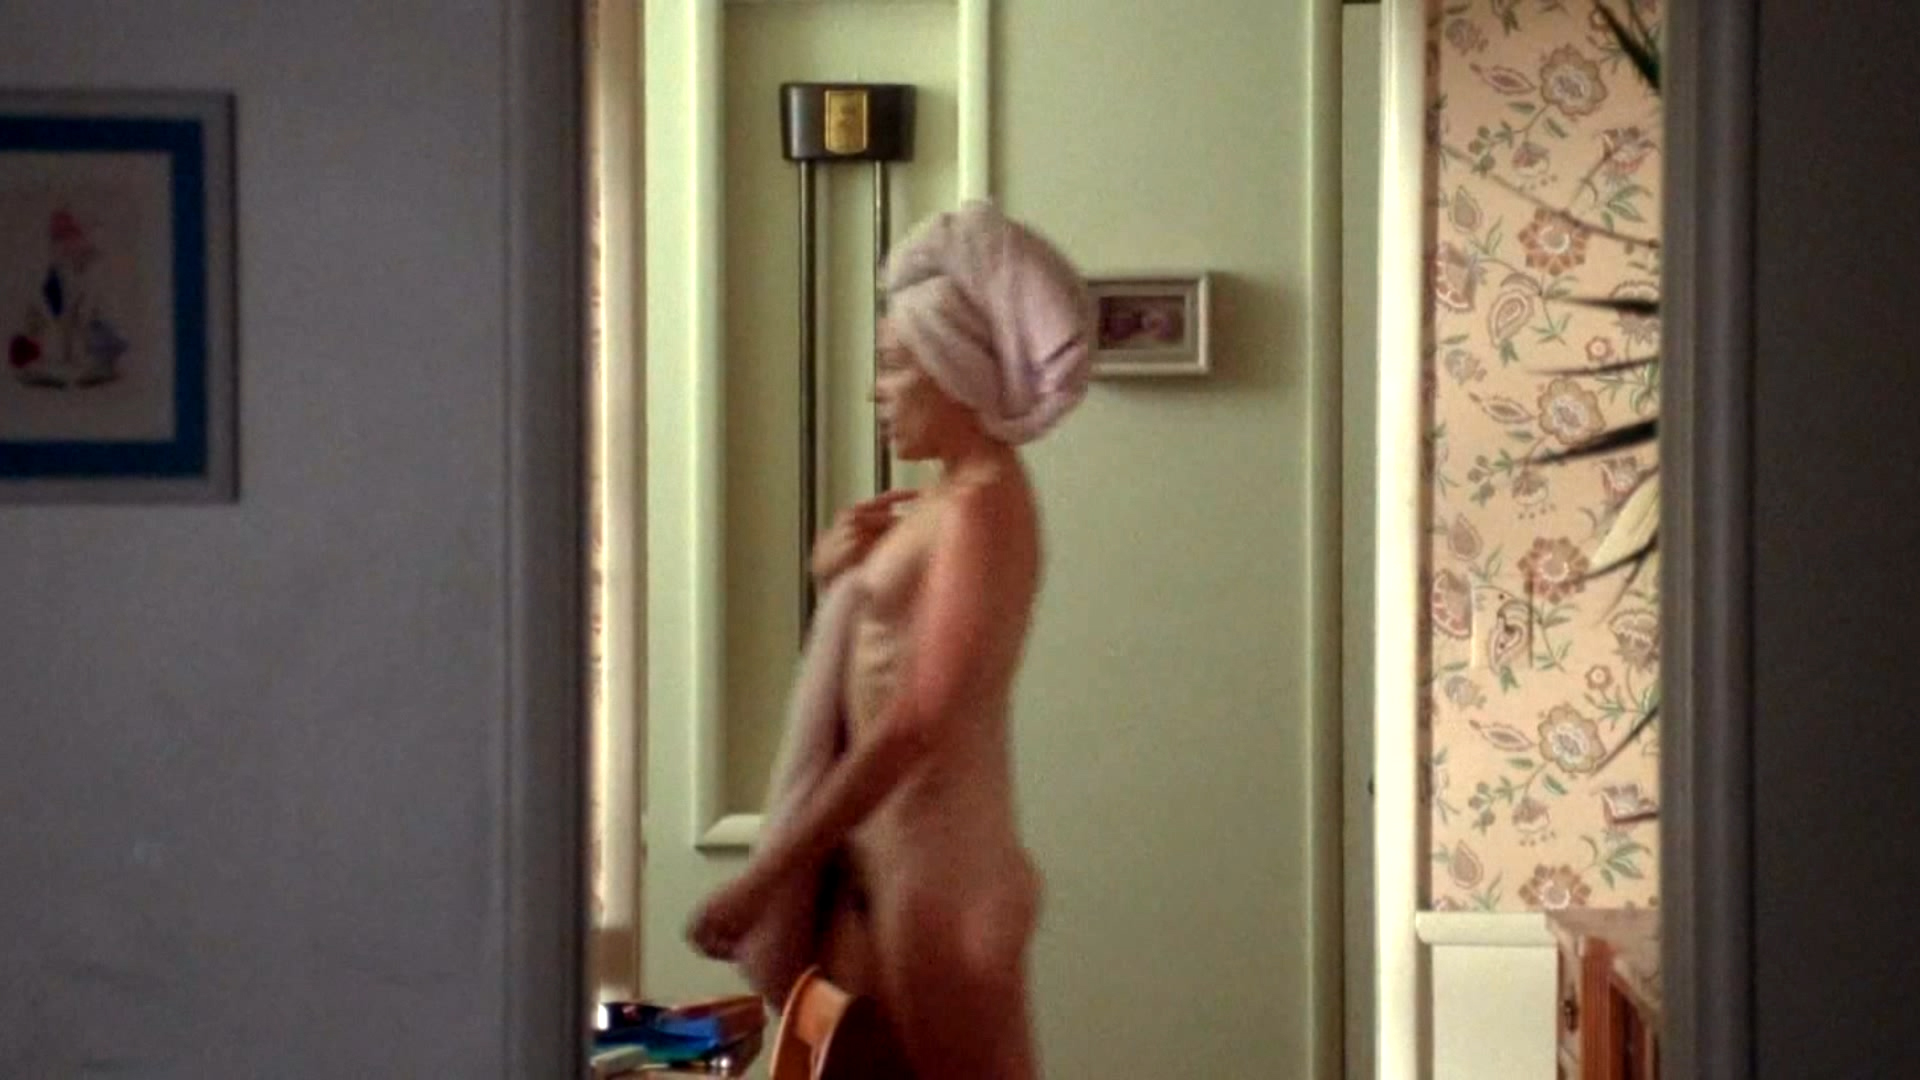 Frances McDormand Nude (35 years) in nude scene from Short Cuts (1993). 